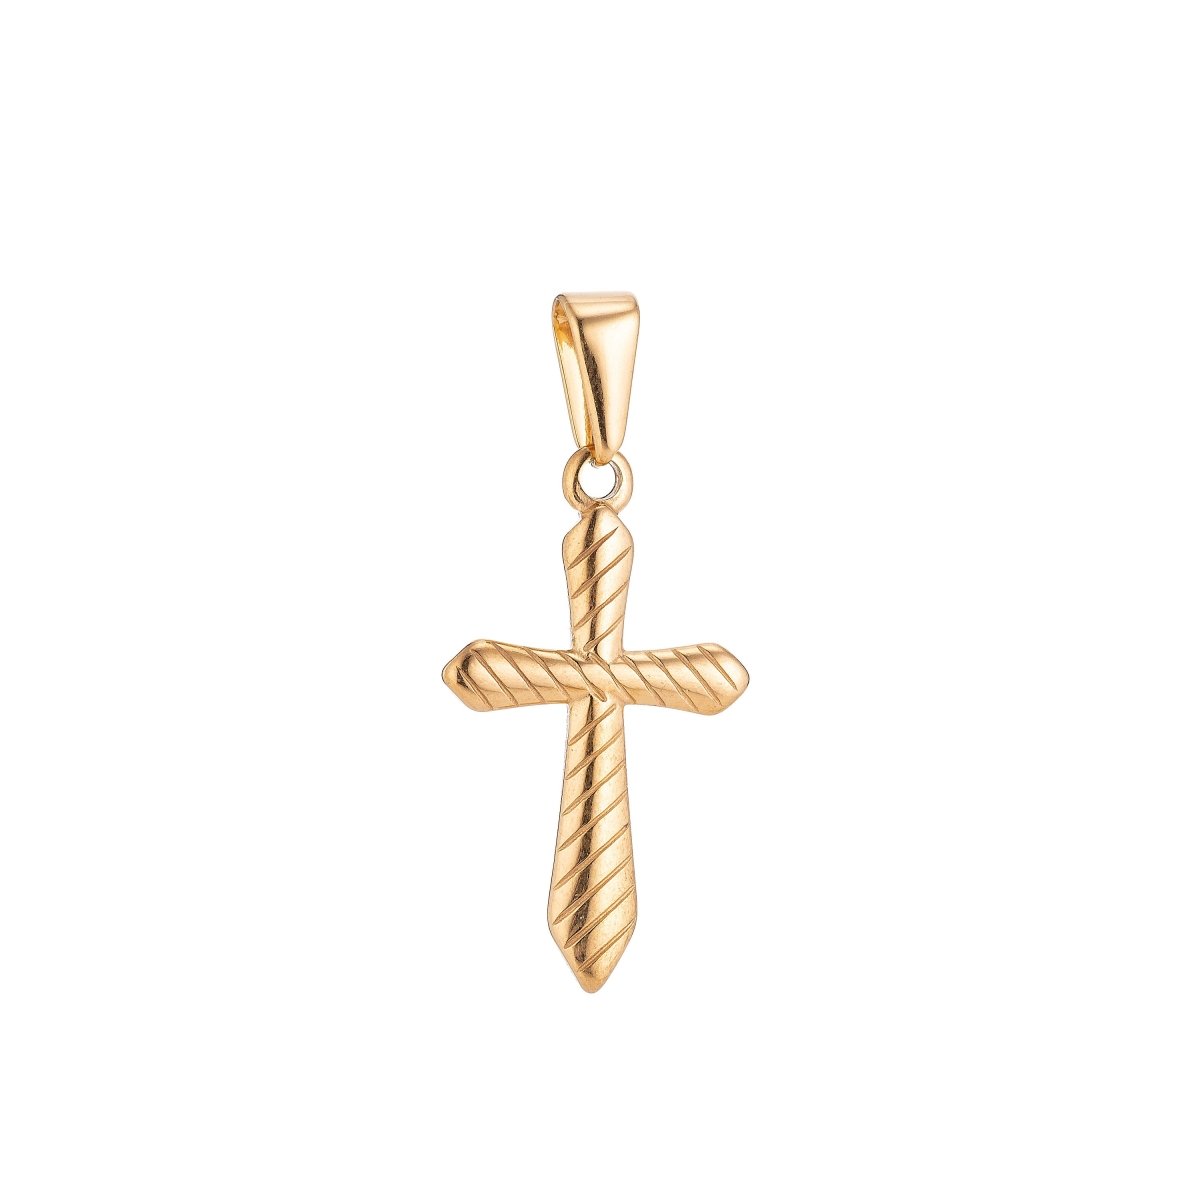 On Sale! CLEARANCE! Cross with Stripes Jesus Faith Love Hope 24K Gold Filled Stainless Steel Silver Pendant w/ Bails Findings for Dangle Necklace Jewelry Making J-384 - DLUXCA